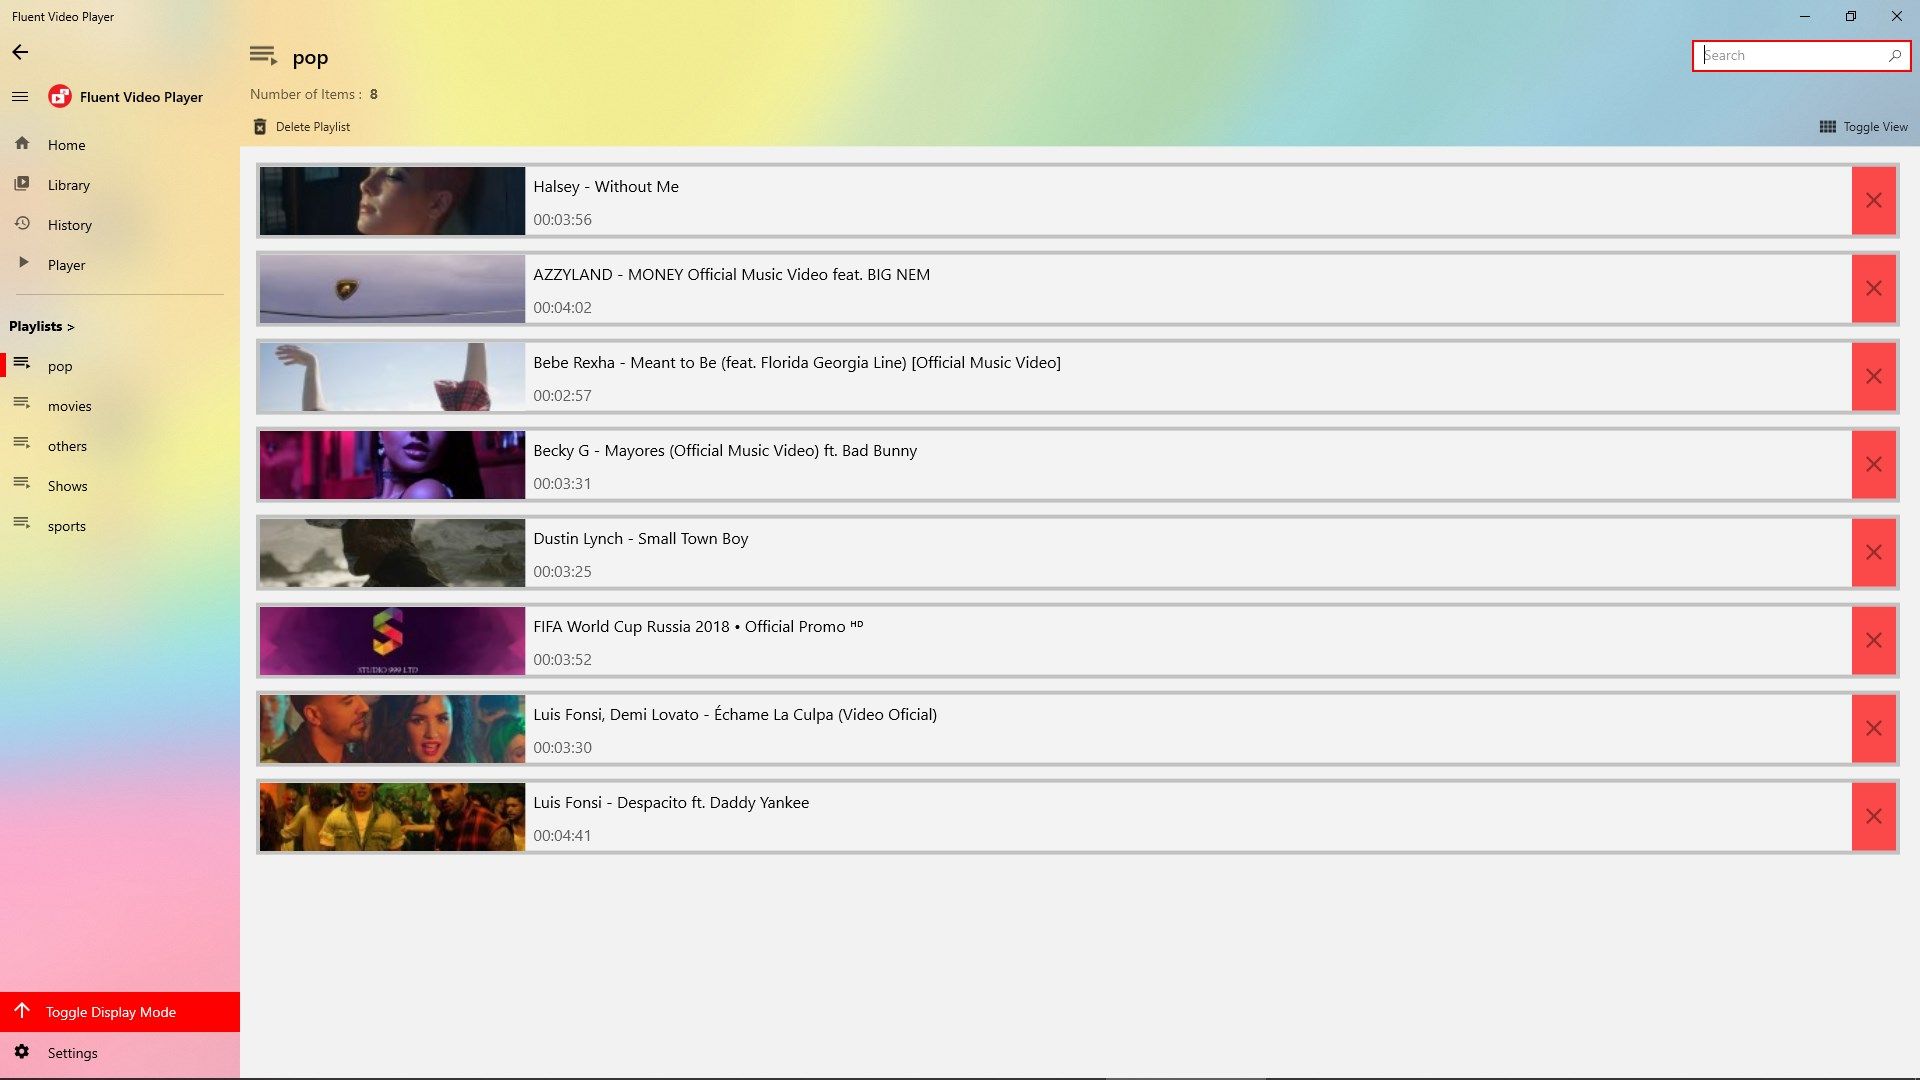 Playlist showing videos in List View Mode.